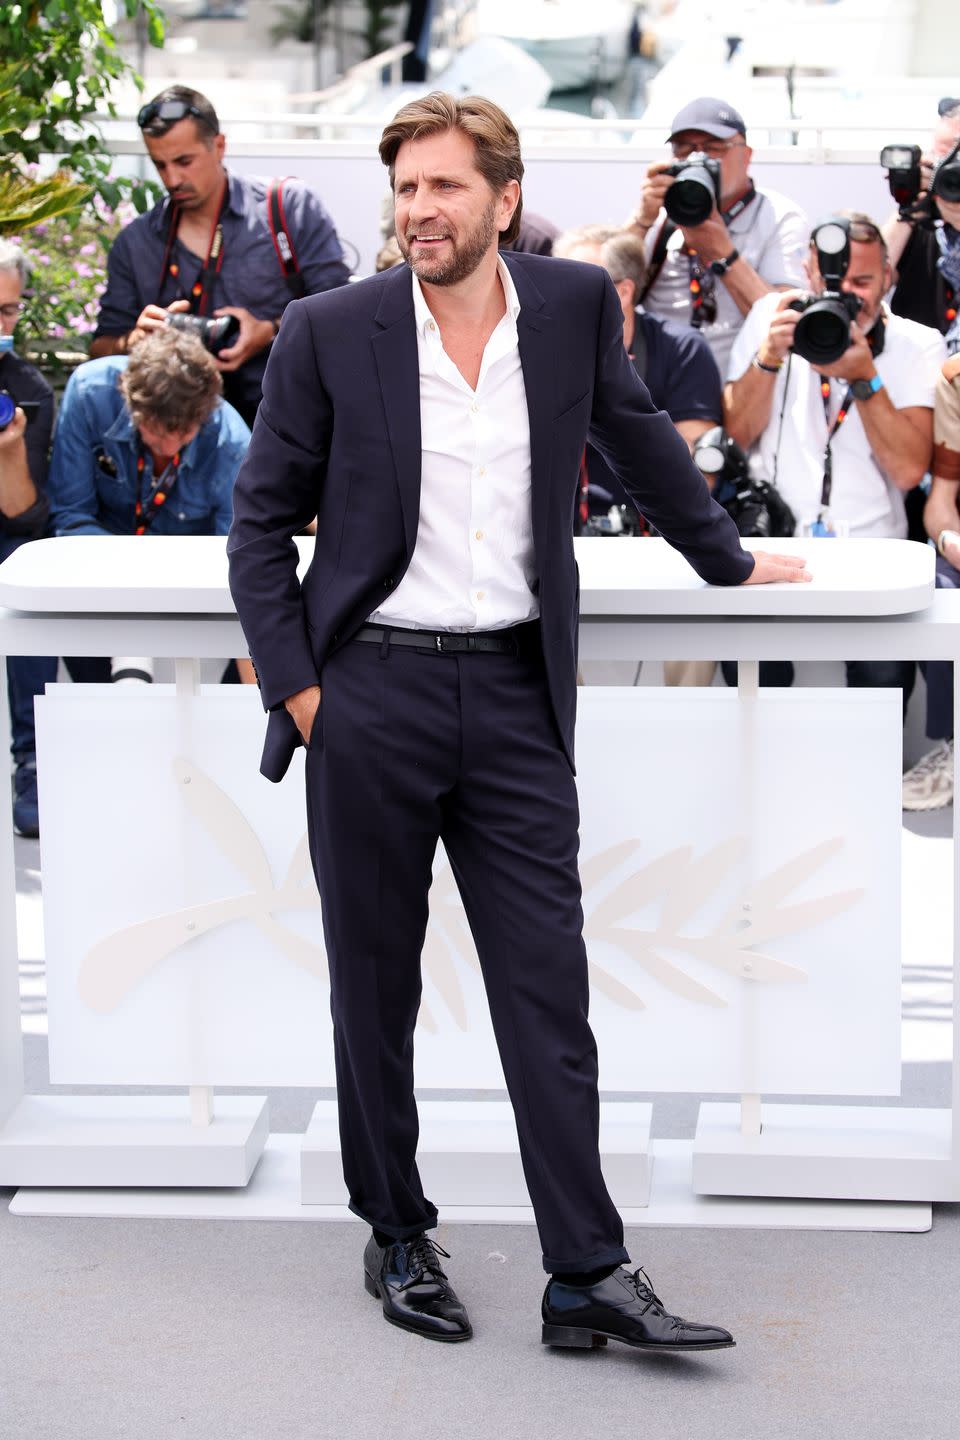 cannes, france may 16 jury president ruben ostlund attends the jury photocall at the 76th annual cannes film festival at palais des festivals on may 16, 2023 in cannes, france photo by daniele venturelliwireimage